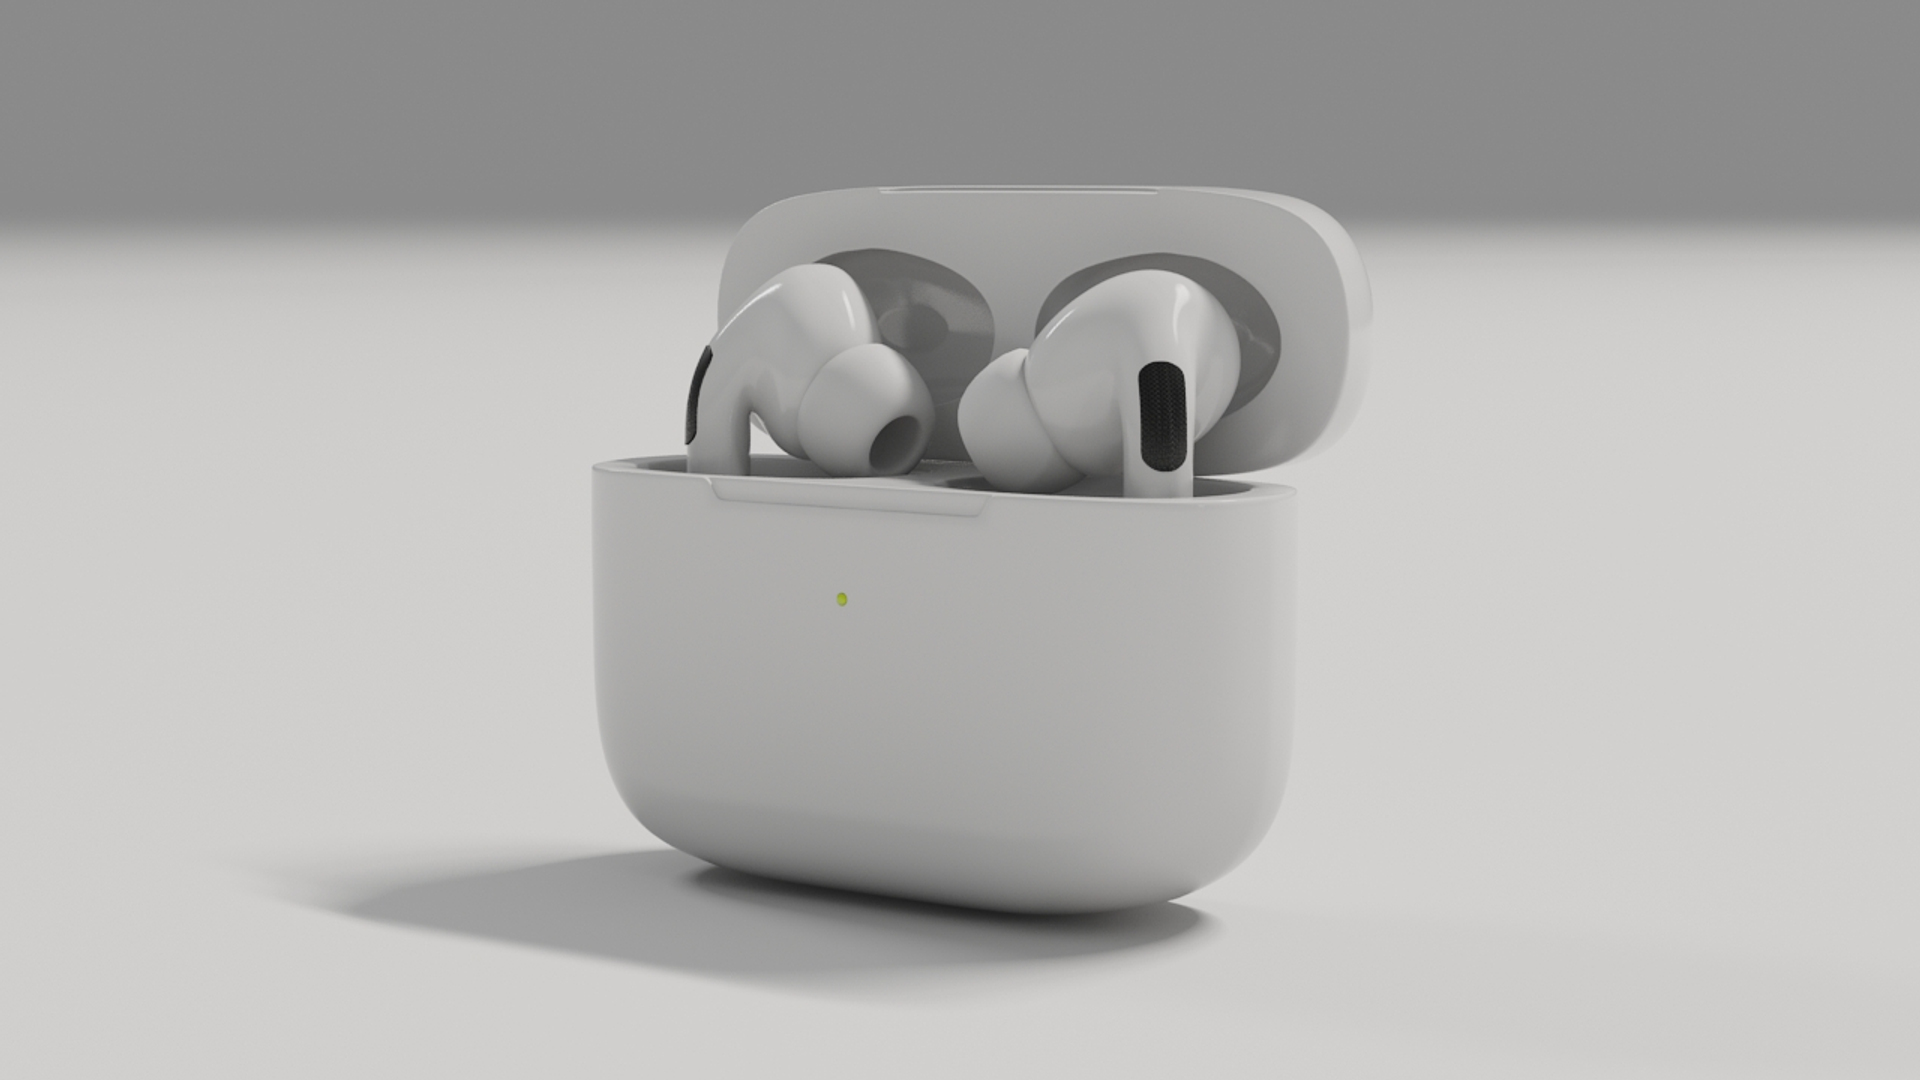 Airpods pro анимация. AIRPODS Pro 3. Air pods 3 и AIRPODS Pro. Apple Earpods 3 Pro. Правый наушник Apple AIRPODS Pro.